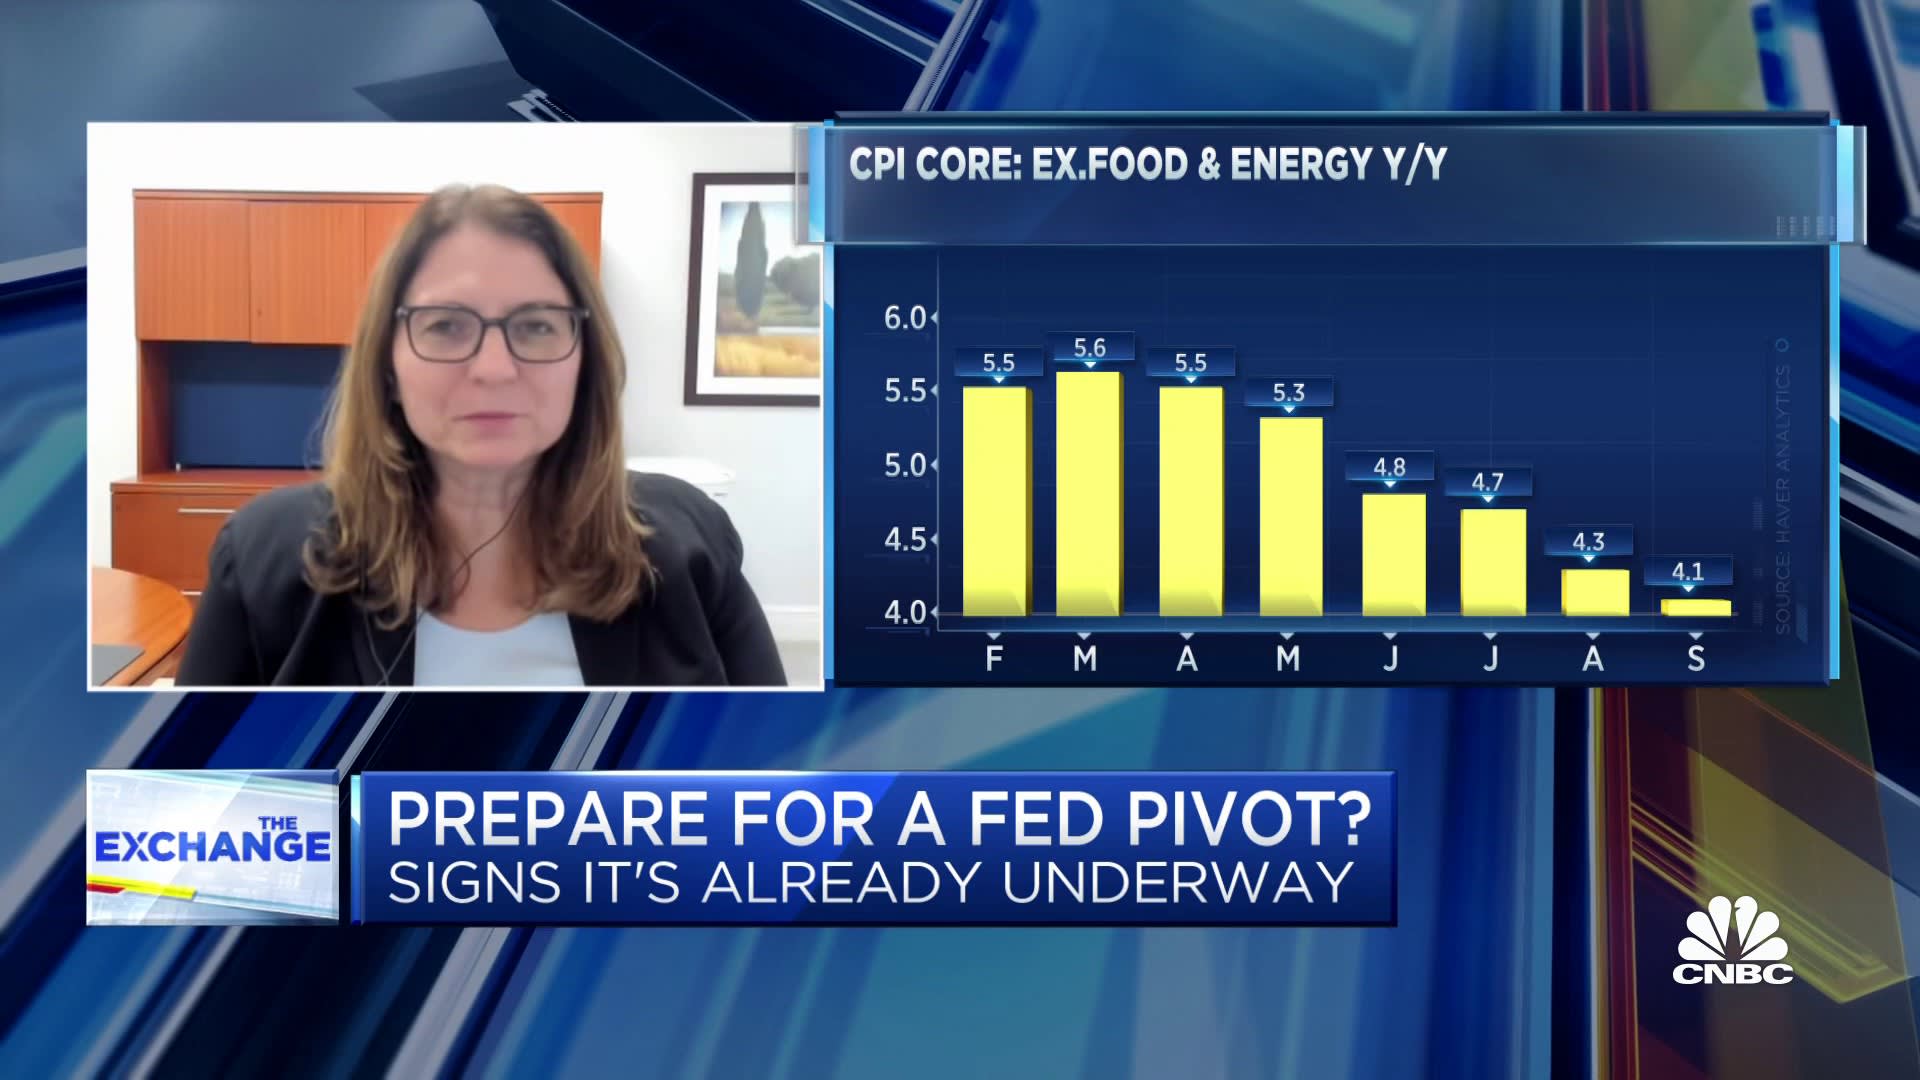 Core service numbers show inflation is still relatively elevated, says Nationwide's Kathy Bostjancic